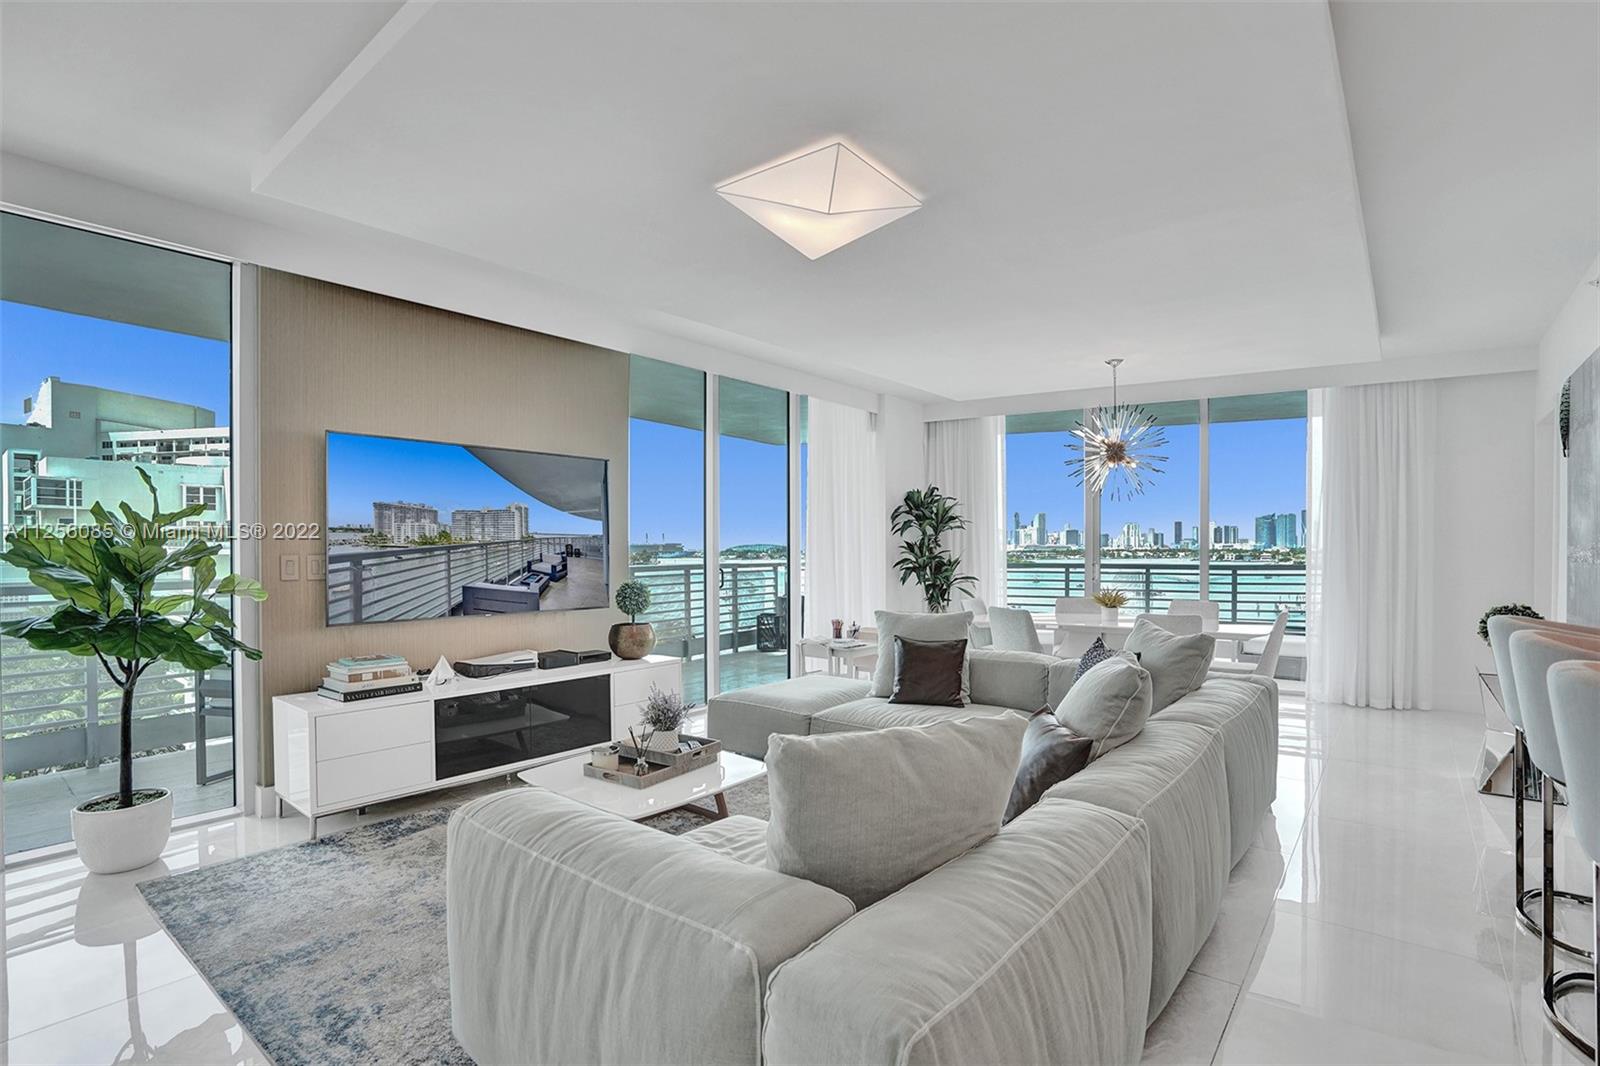 Beautifully and fully remodeled  3/3 at the Capri South Beach, a luxury boutique building sitting on the bay.  This very special and spacious apartment has some of the best Direct Bay and skyline views from every room! Beautiful light, stunning renovations and top of the line appliances. Enjoy our magnificent Miami sunsets from a large wrap-around terrace or a second terrace off the master. Elegant and charming, Capri offers exceptional service and a wonderful lifestyle with a concierge, valet, fitness center, pool, jacuzzi, on site management and a private marina.  Boat slips, up to 30ft, available for sale.  Located on a quiet cul-de-sac but just a few blocks from Sunset Harbour, Lincoln Road, great restaurants and fitness clubs – a truly terrific location.